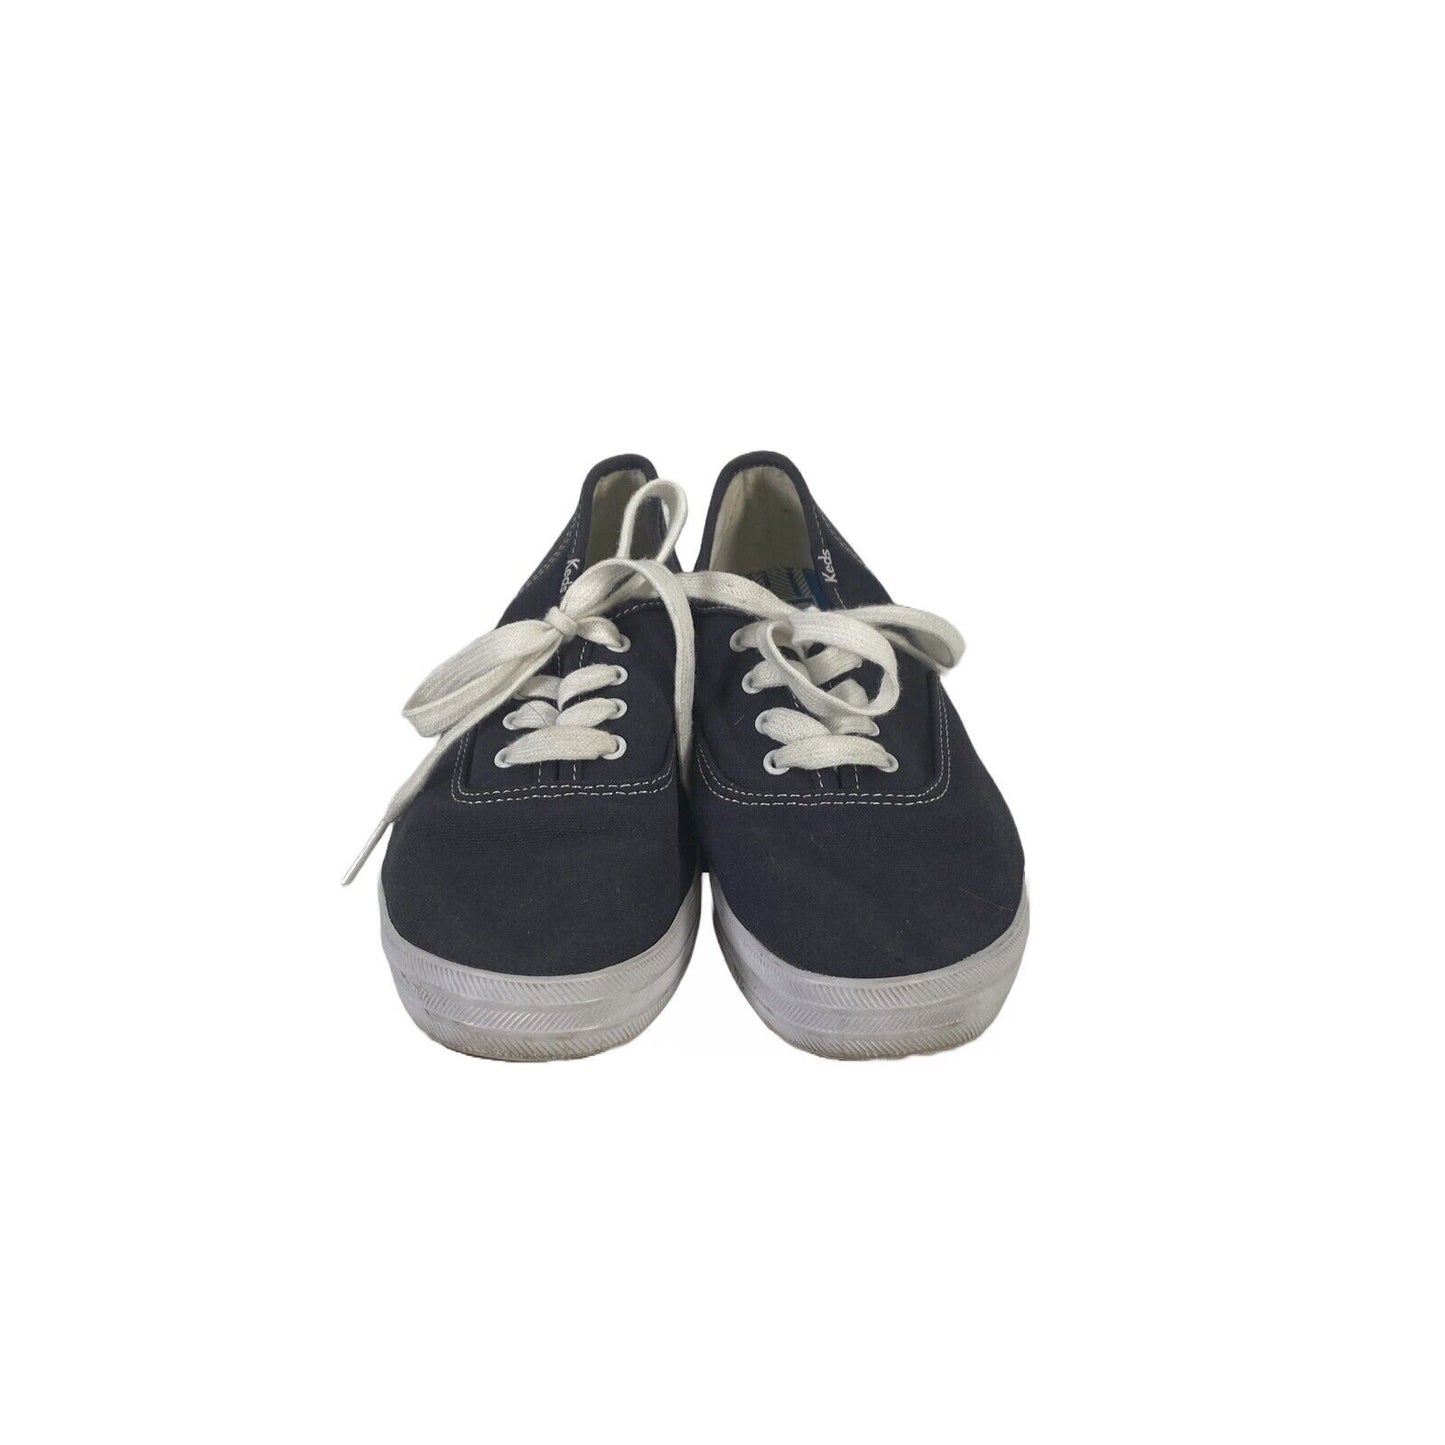 Keds Women's Navy Blue Fabric Lace up Low Top Classic Sneakers Shoes - 7